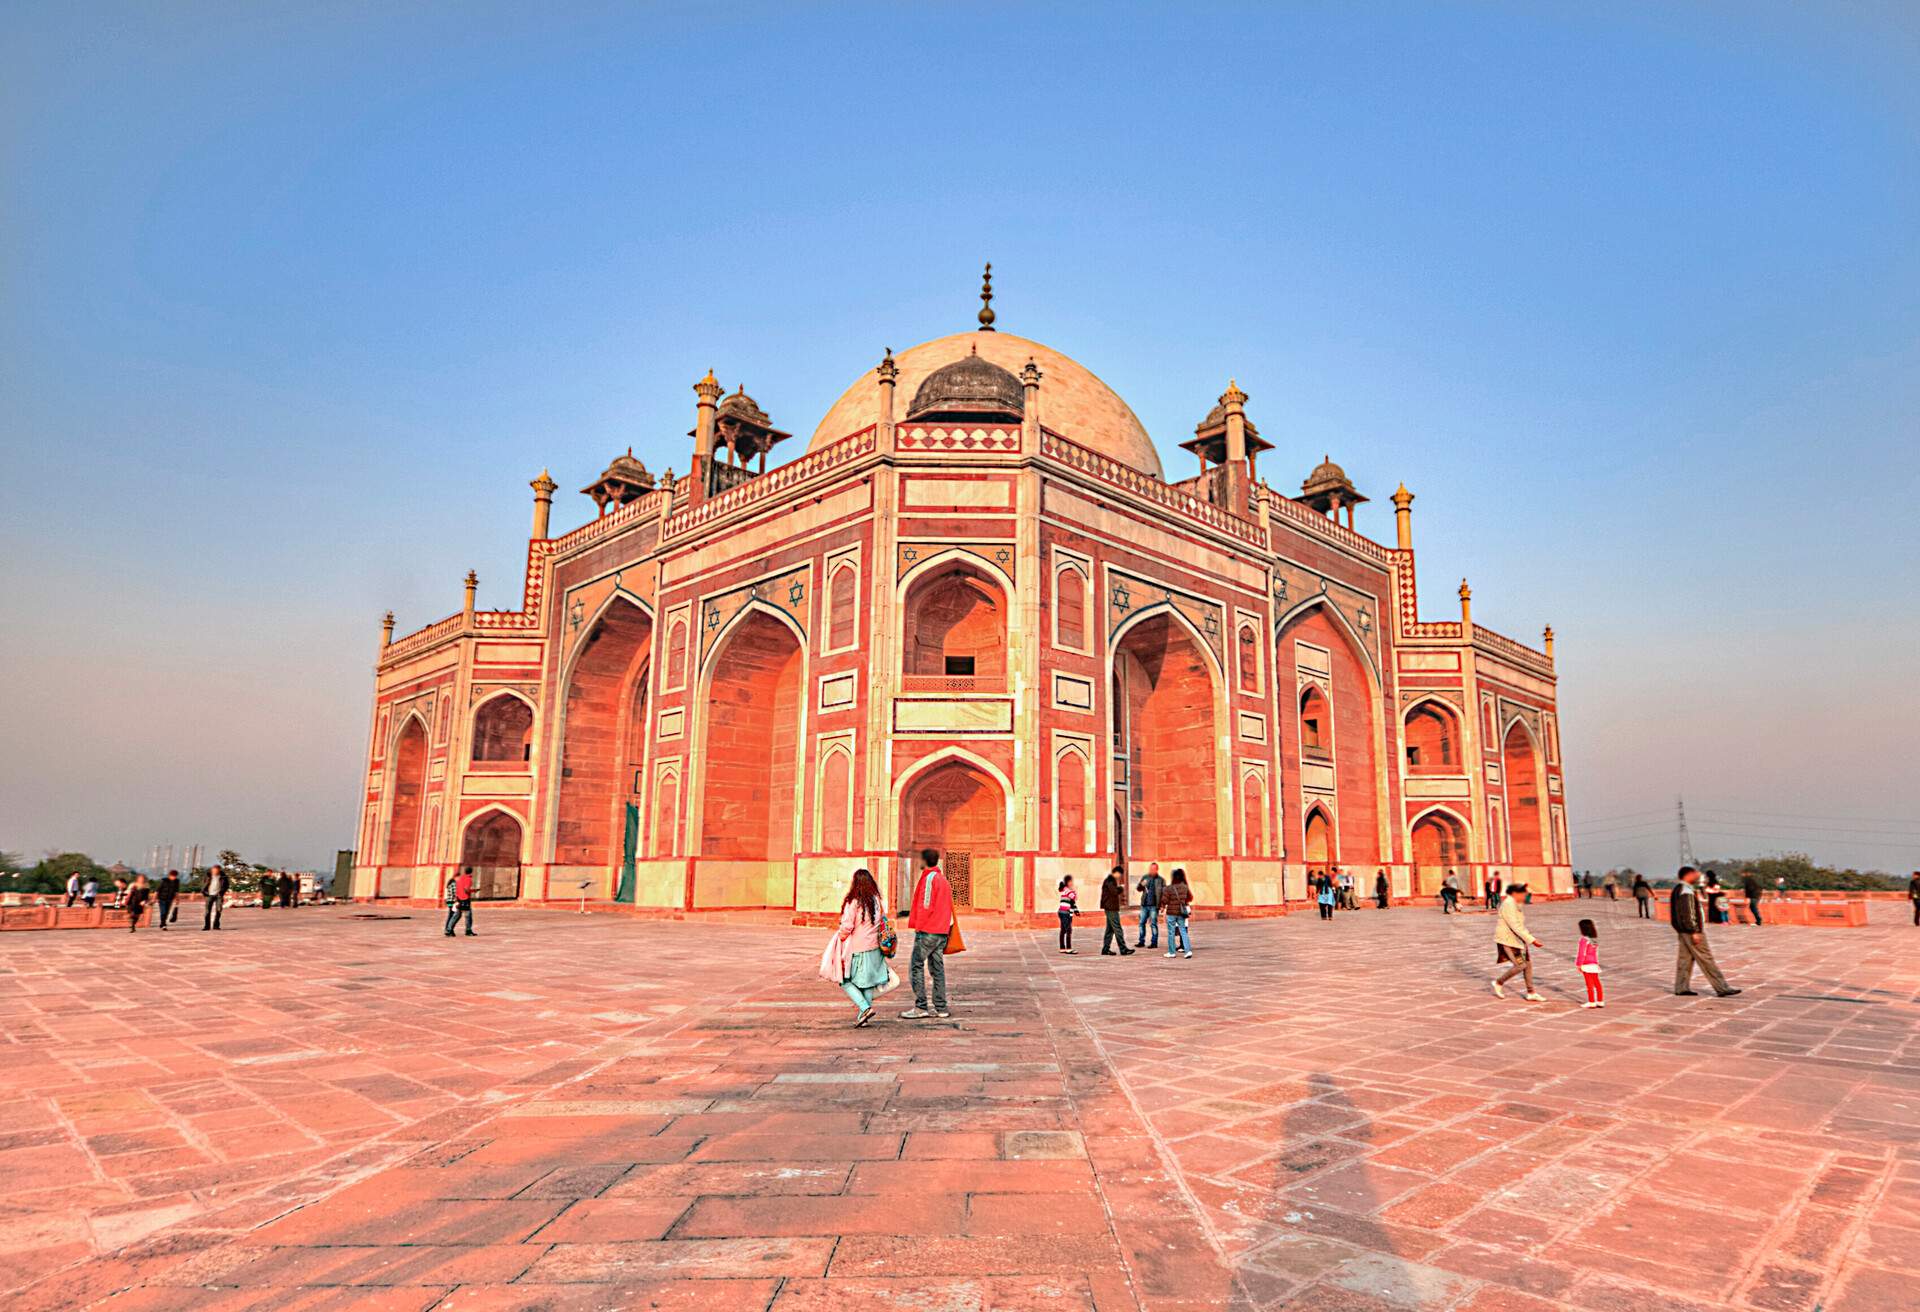 The Tomb complex in Delhi with visitors outside it